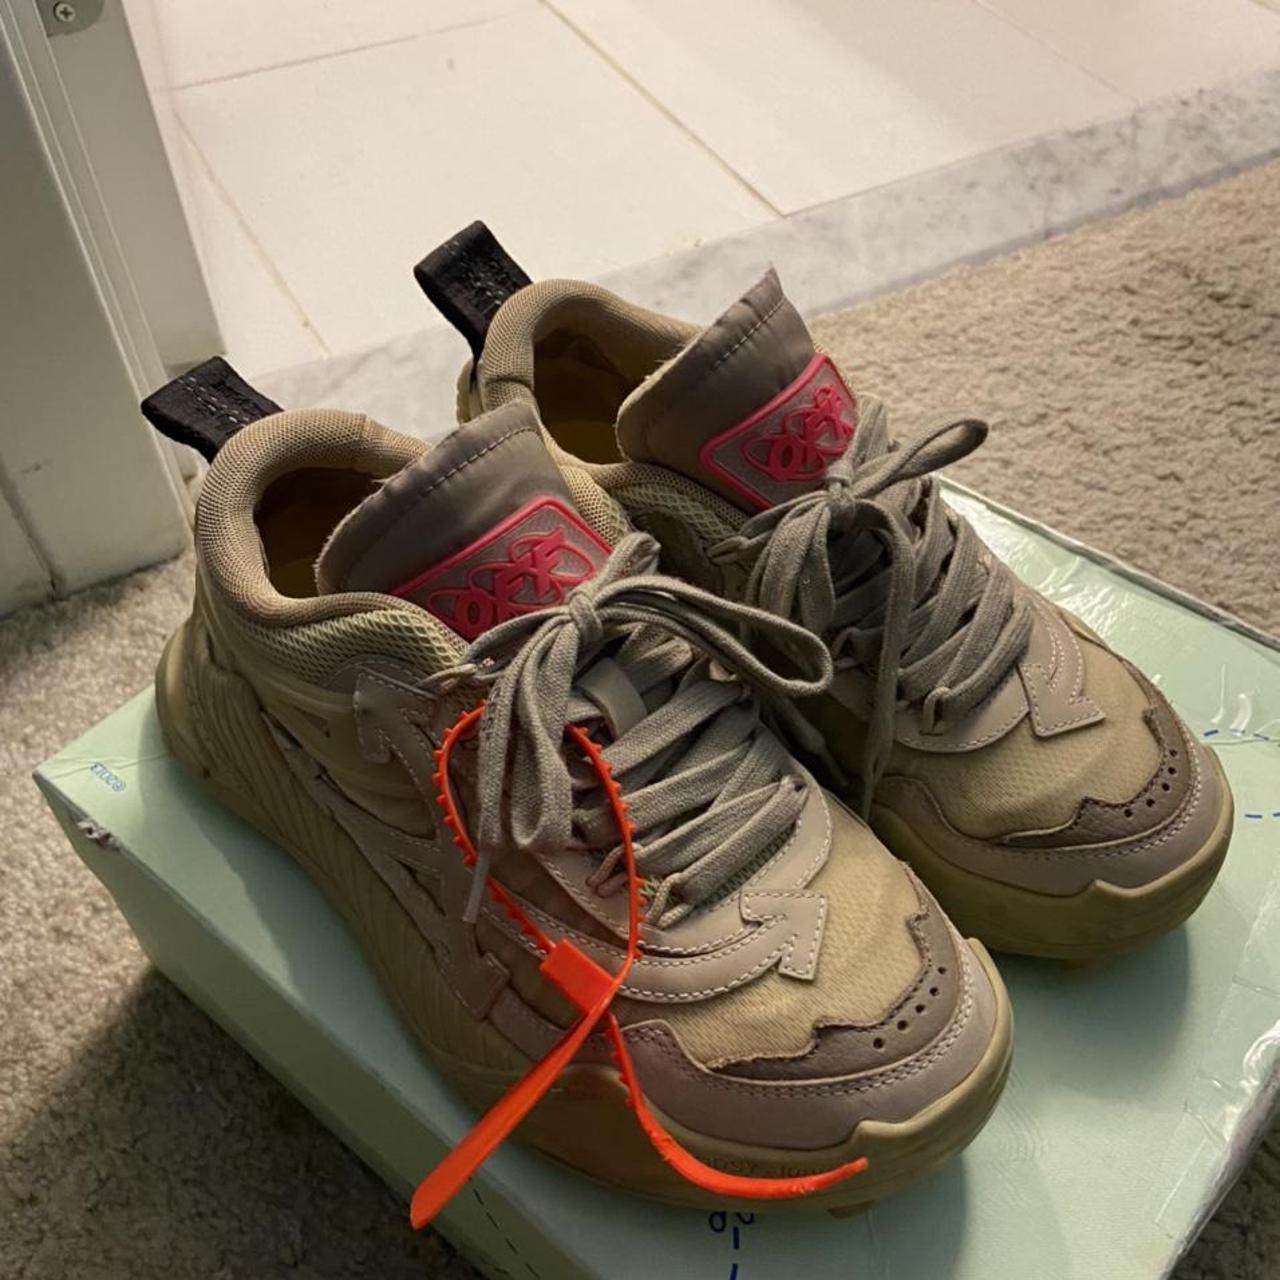 OFF WHITE ODYSSEY-1000 size 37 comes with box,... - Depop